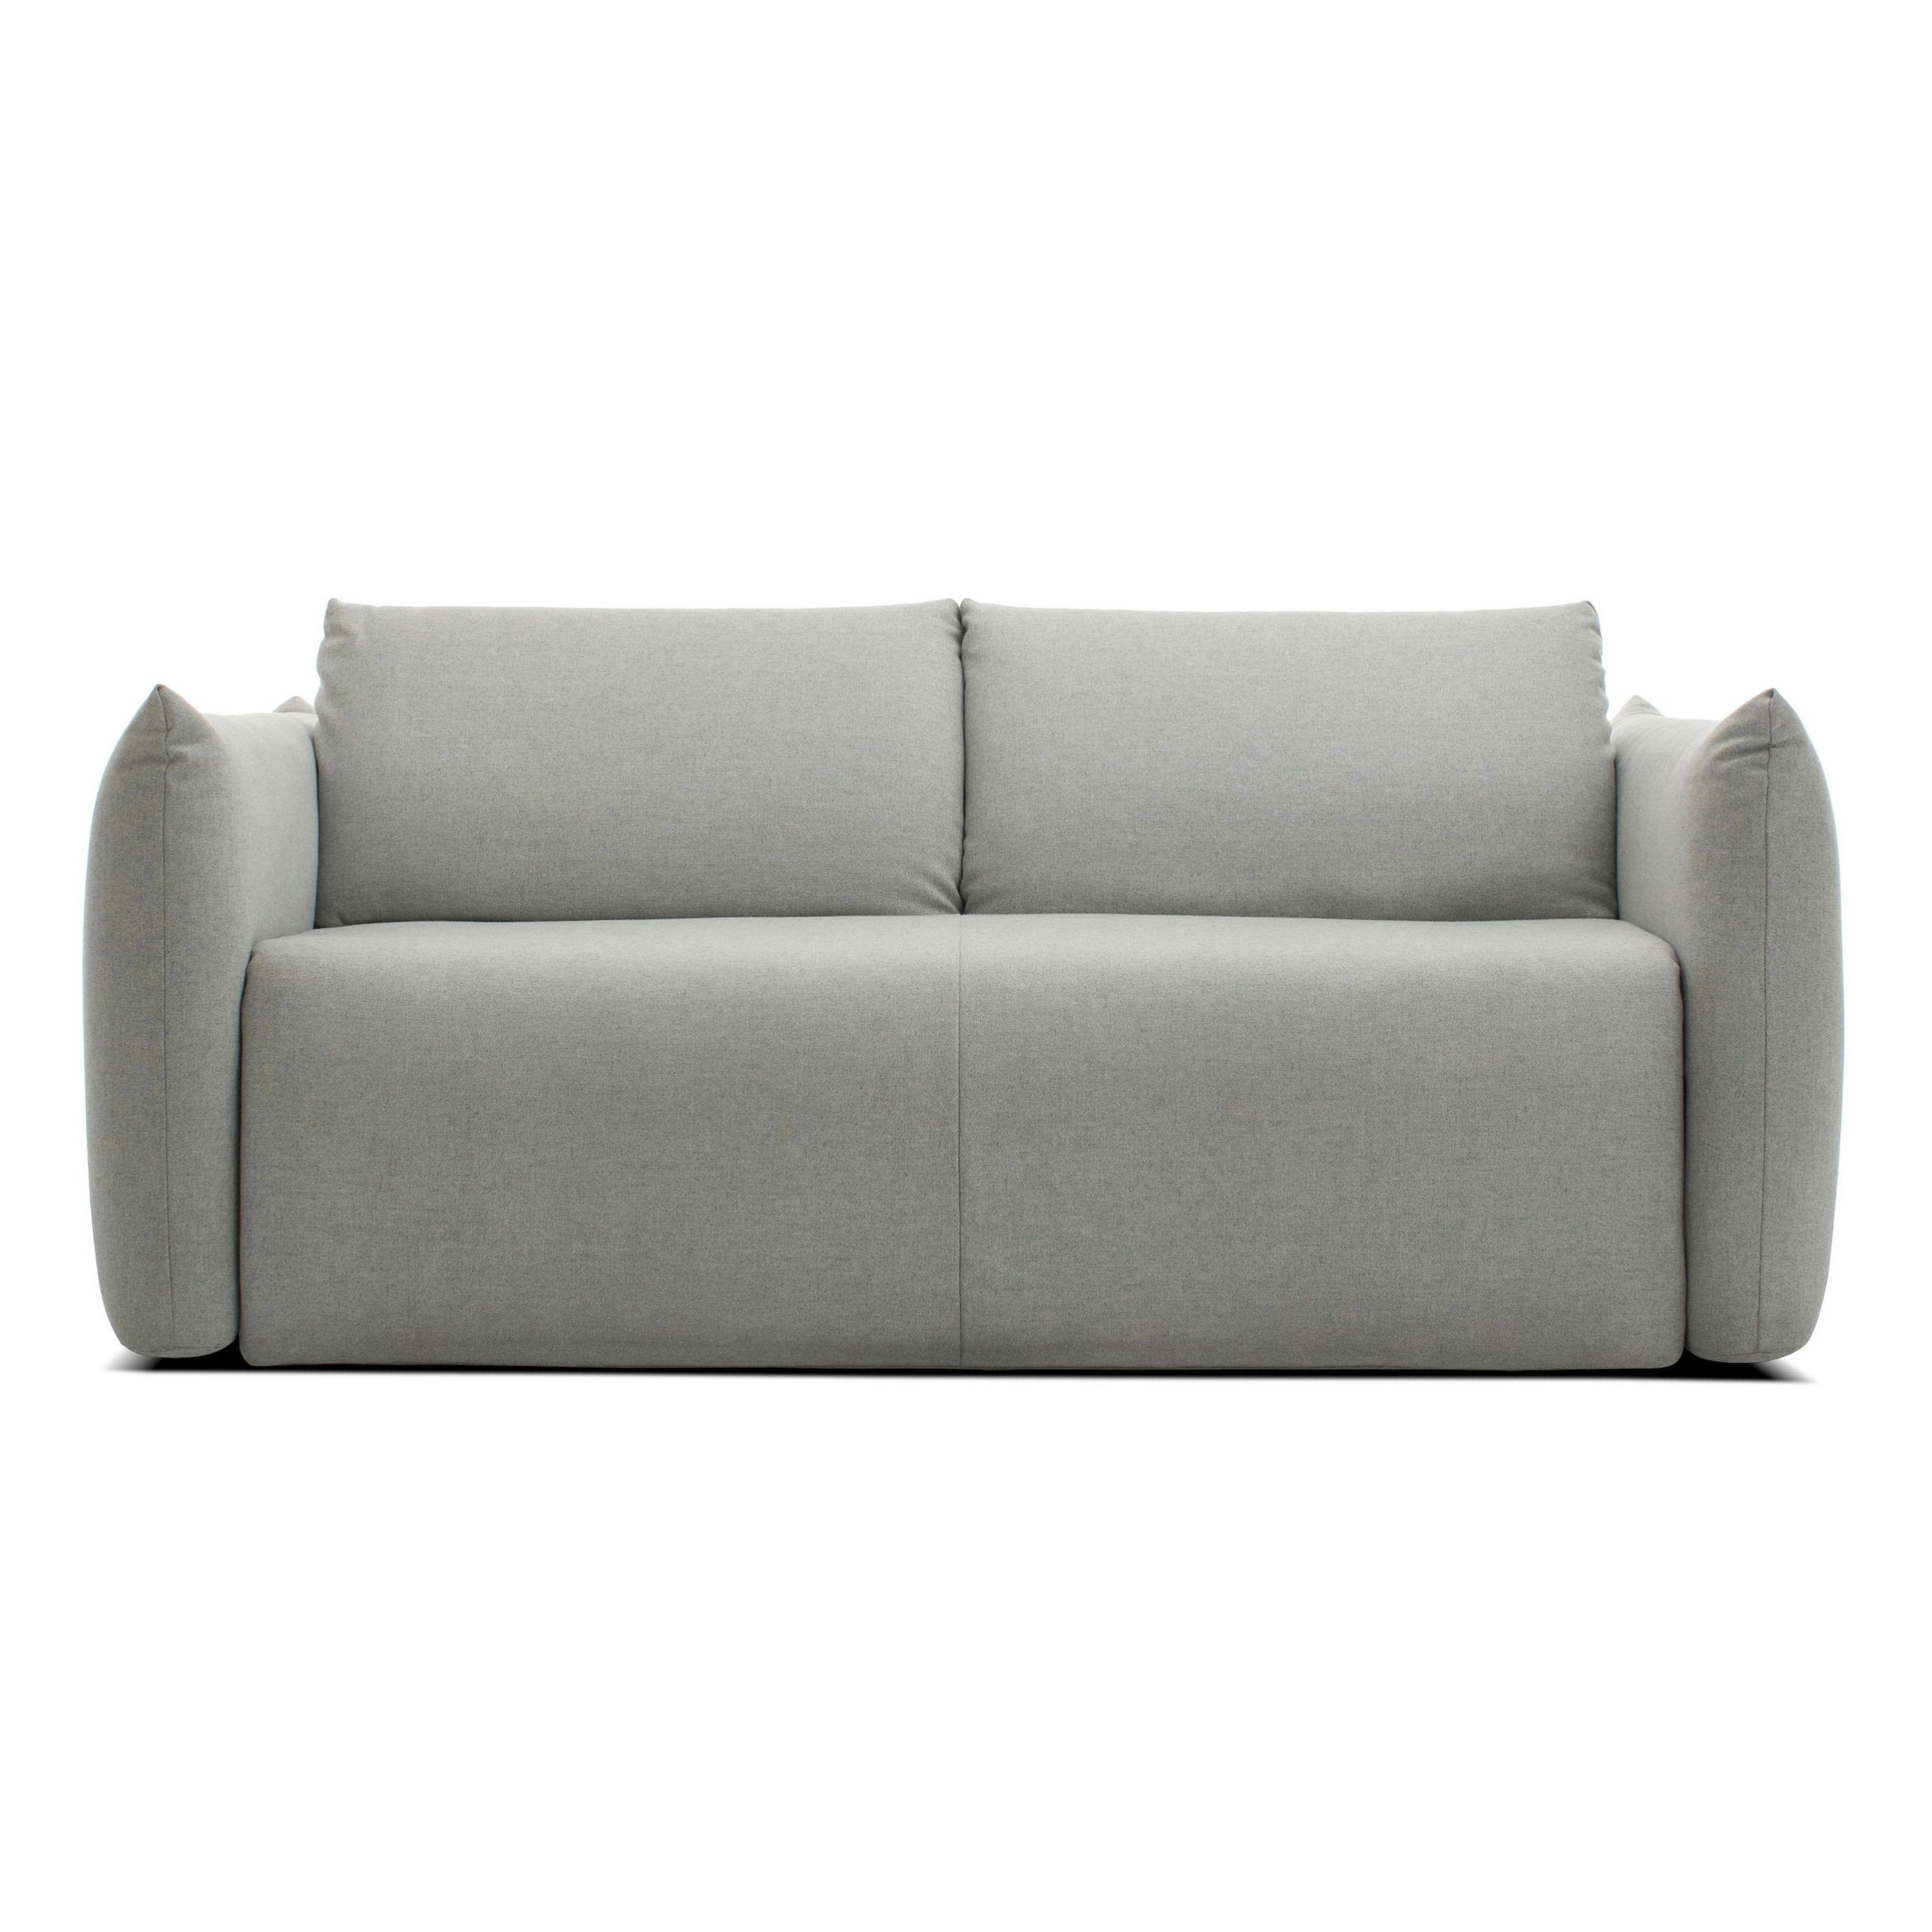 Luna Sofa Bed – Sofas From Extraform (View 9 of 20)